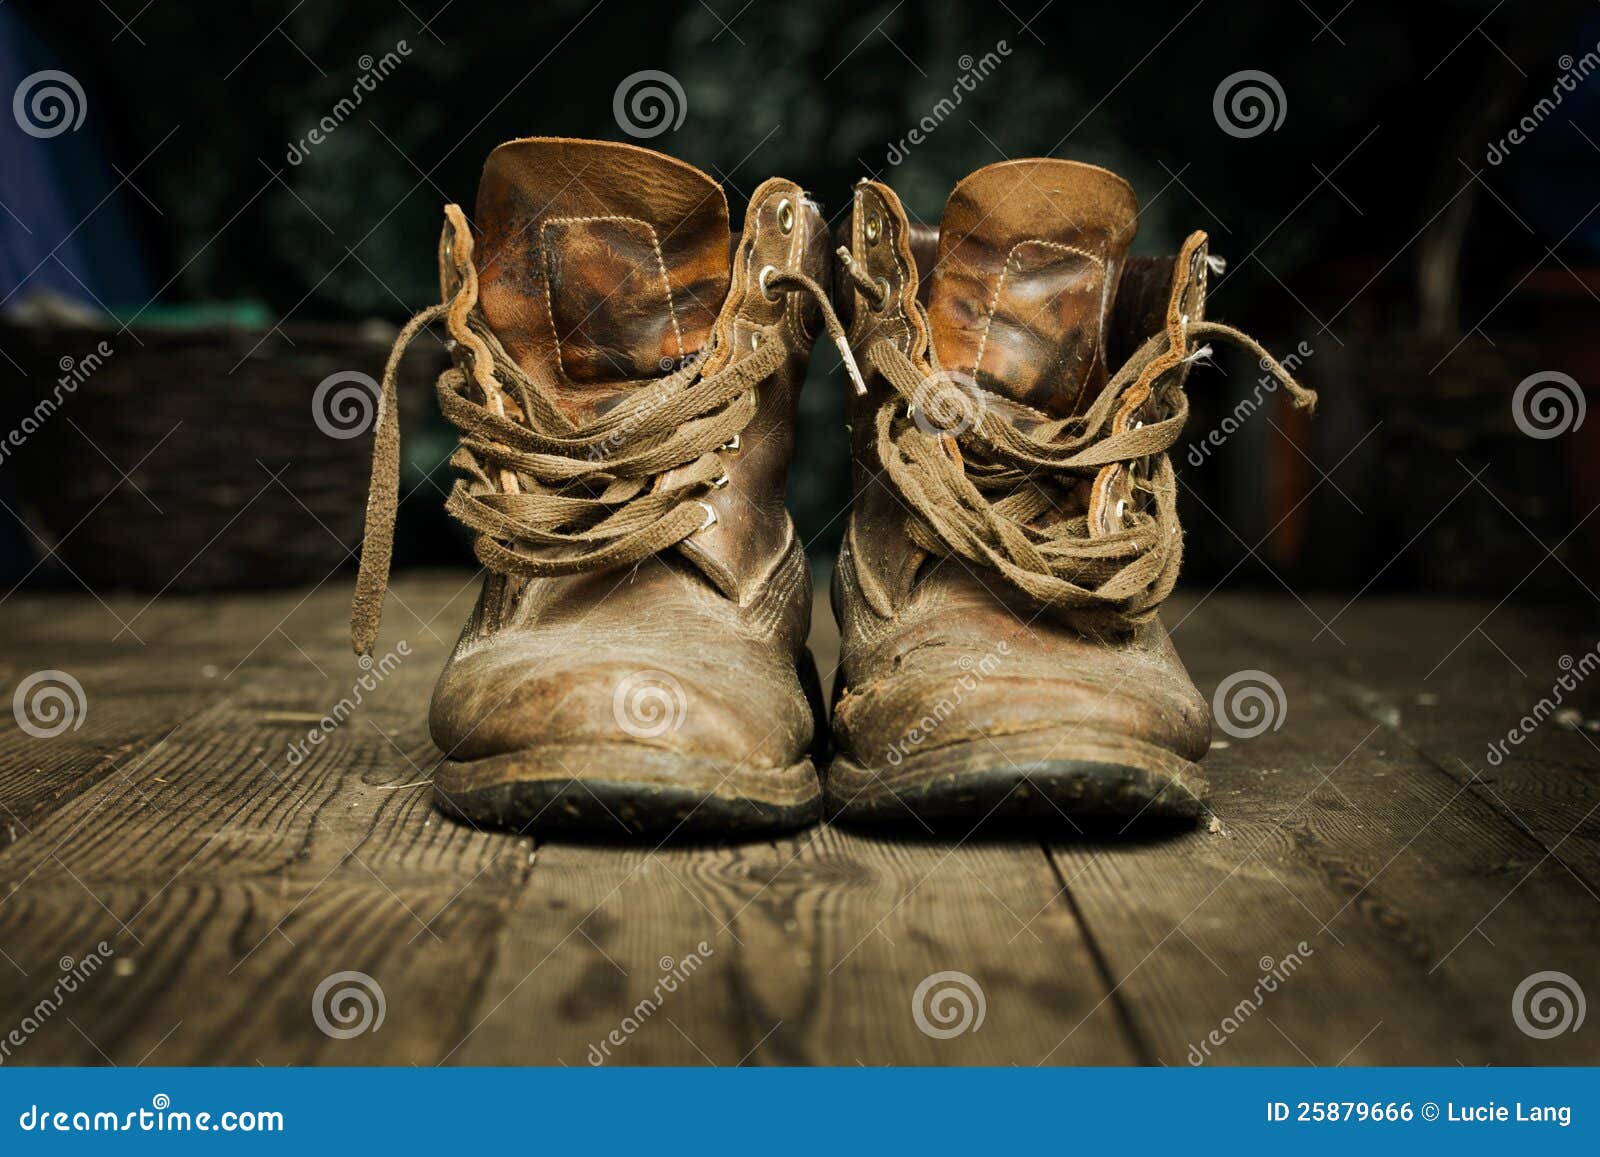 pair of old boots on wooden floor boards